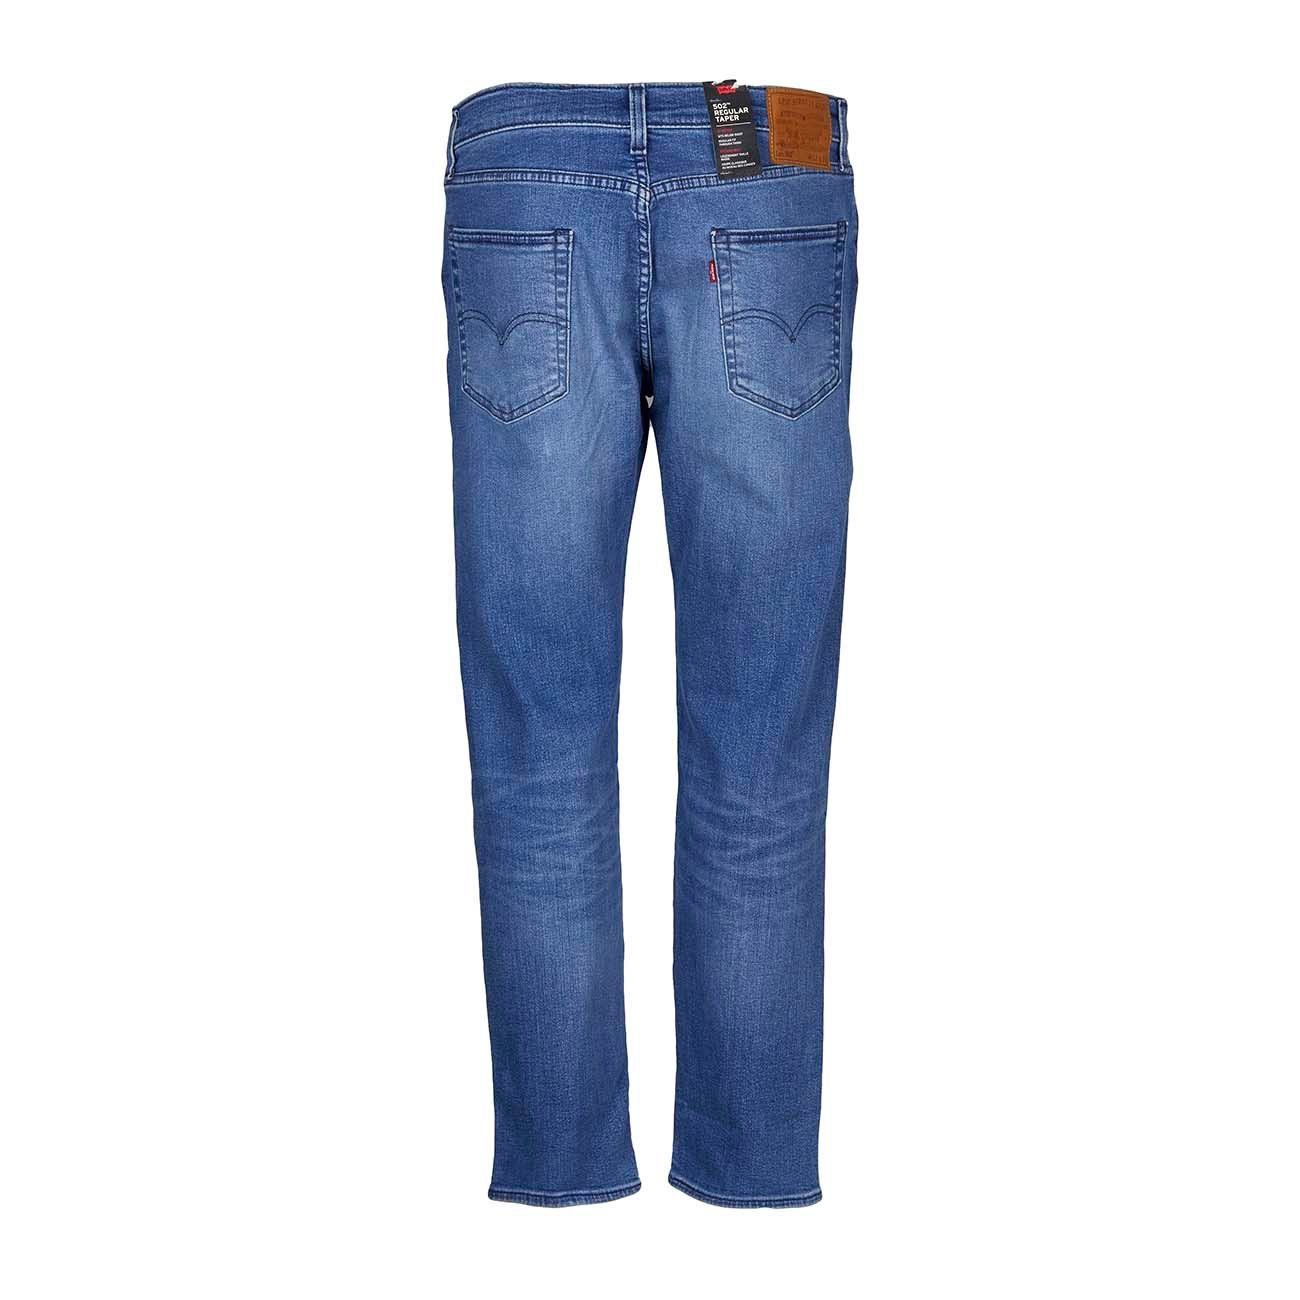 Levi's Mens 502 Regular Fit Stretch Tapered Jeans 